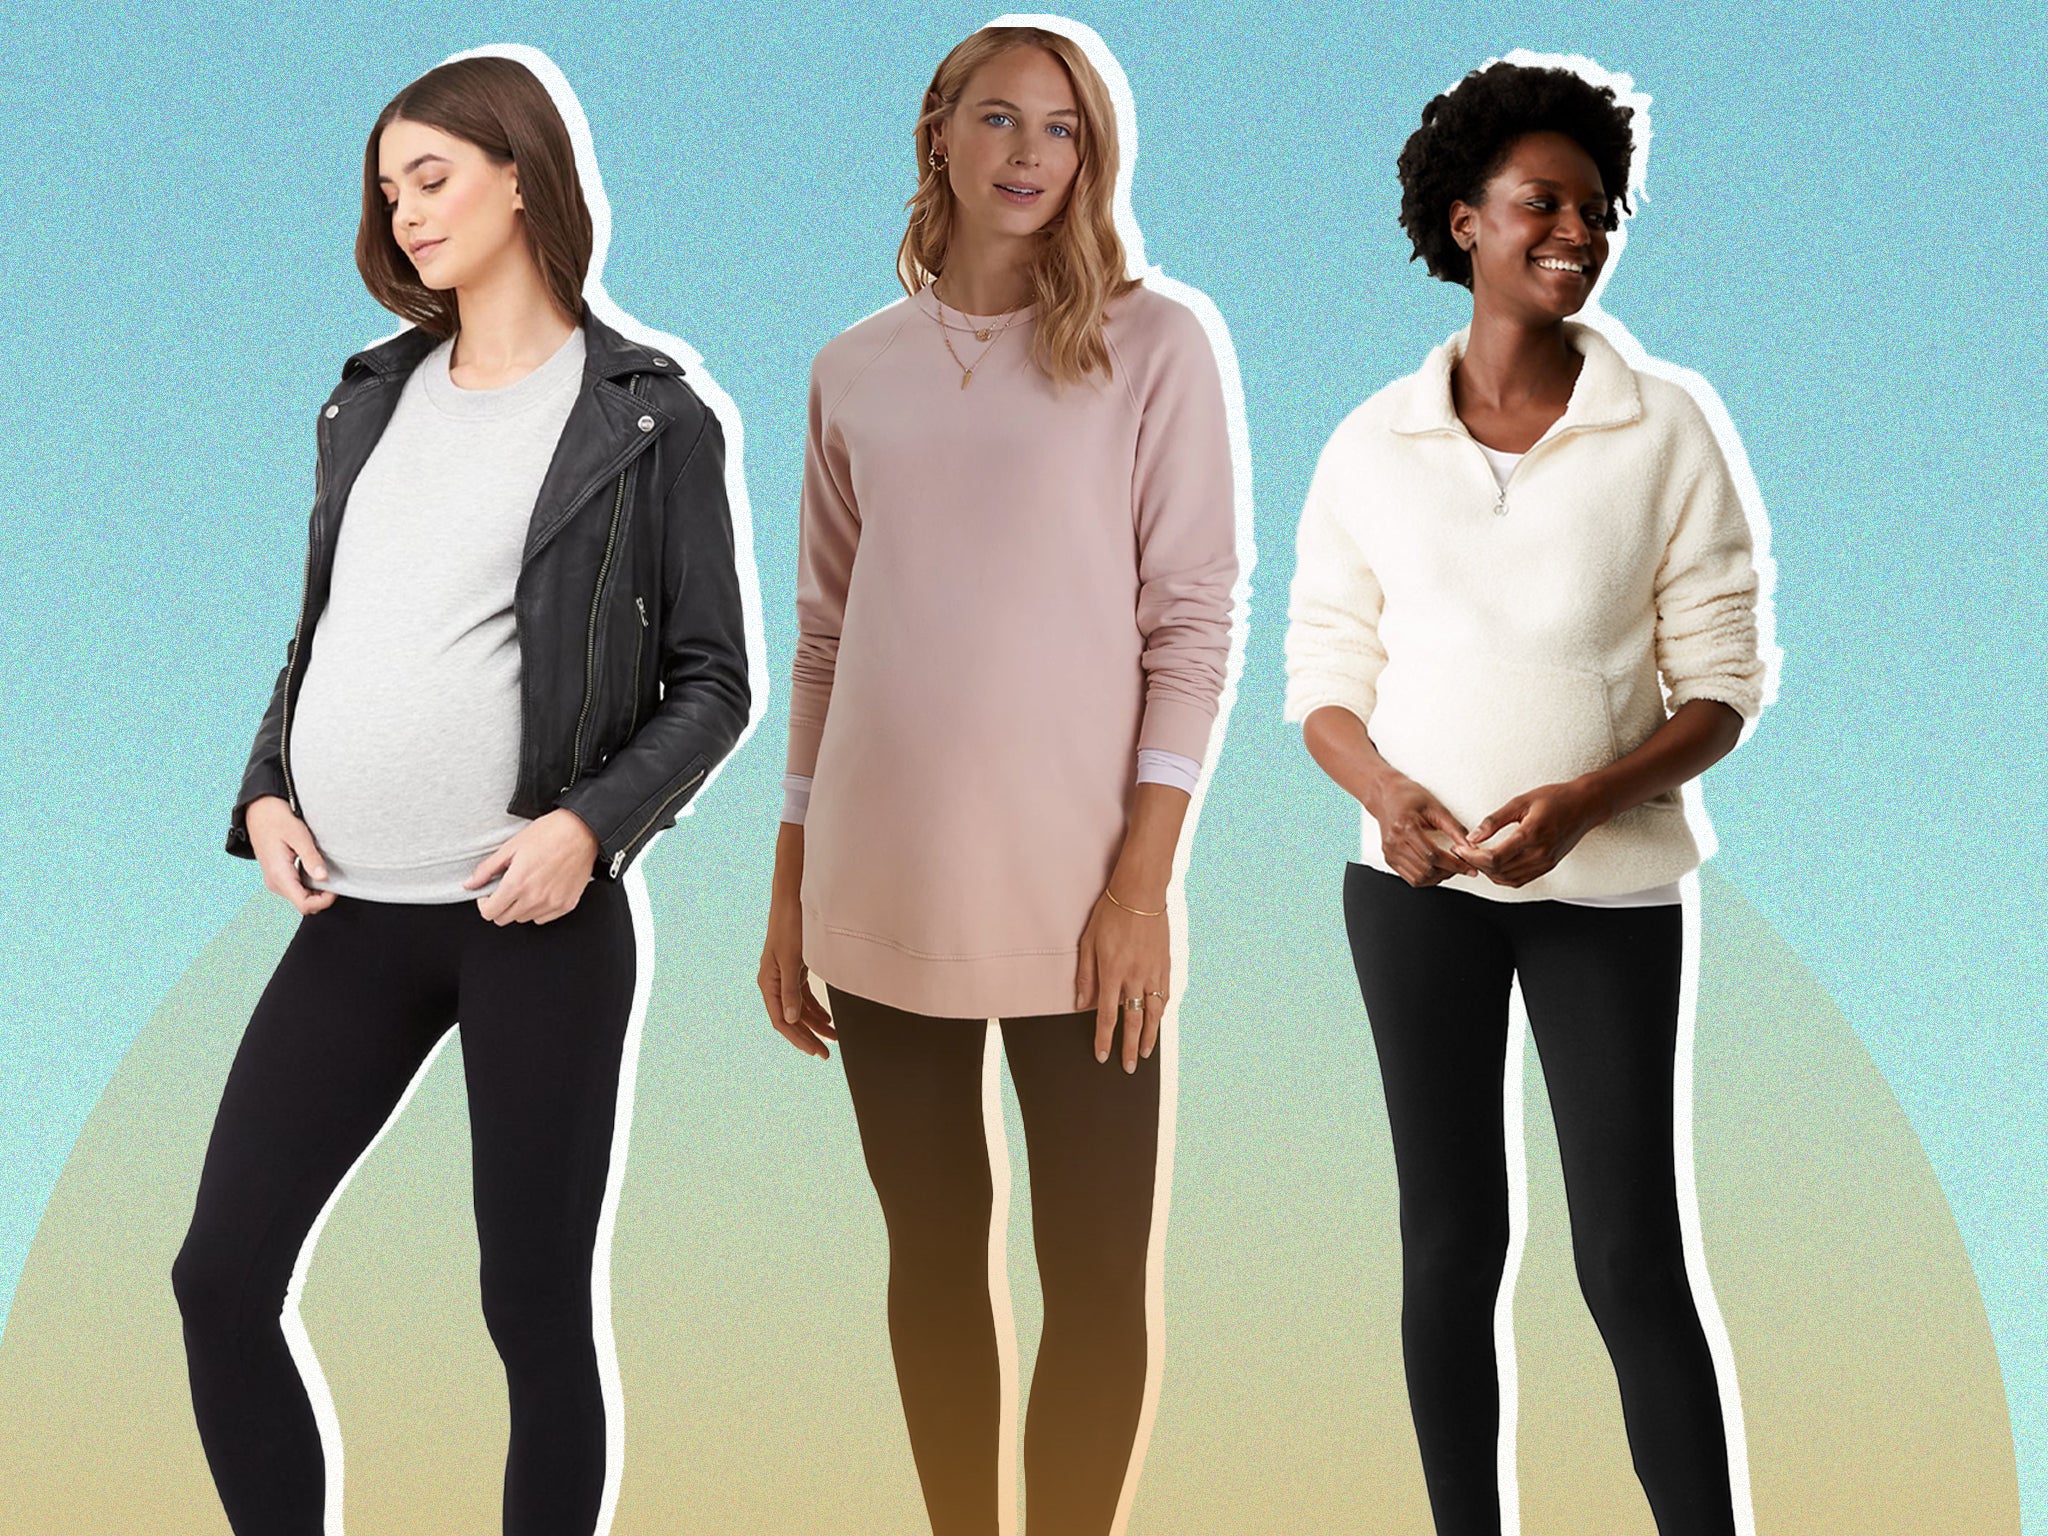 Maternity leggings are designed to support your growing bump and your back